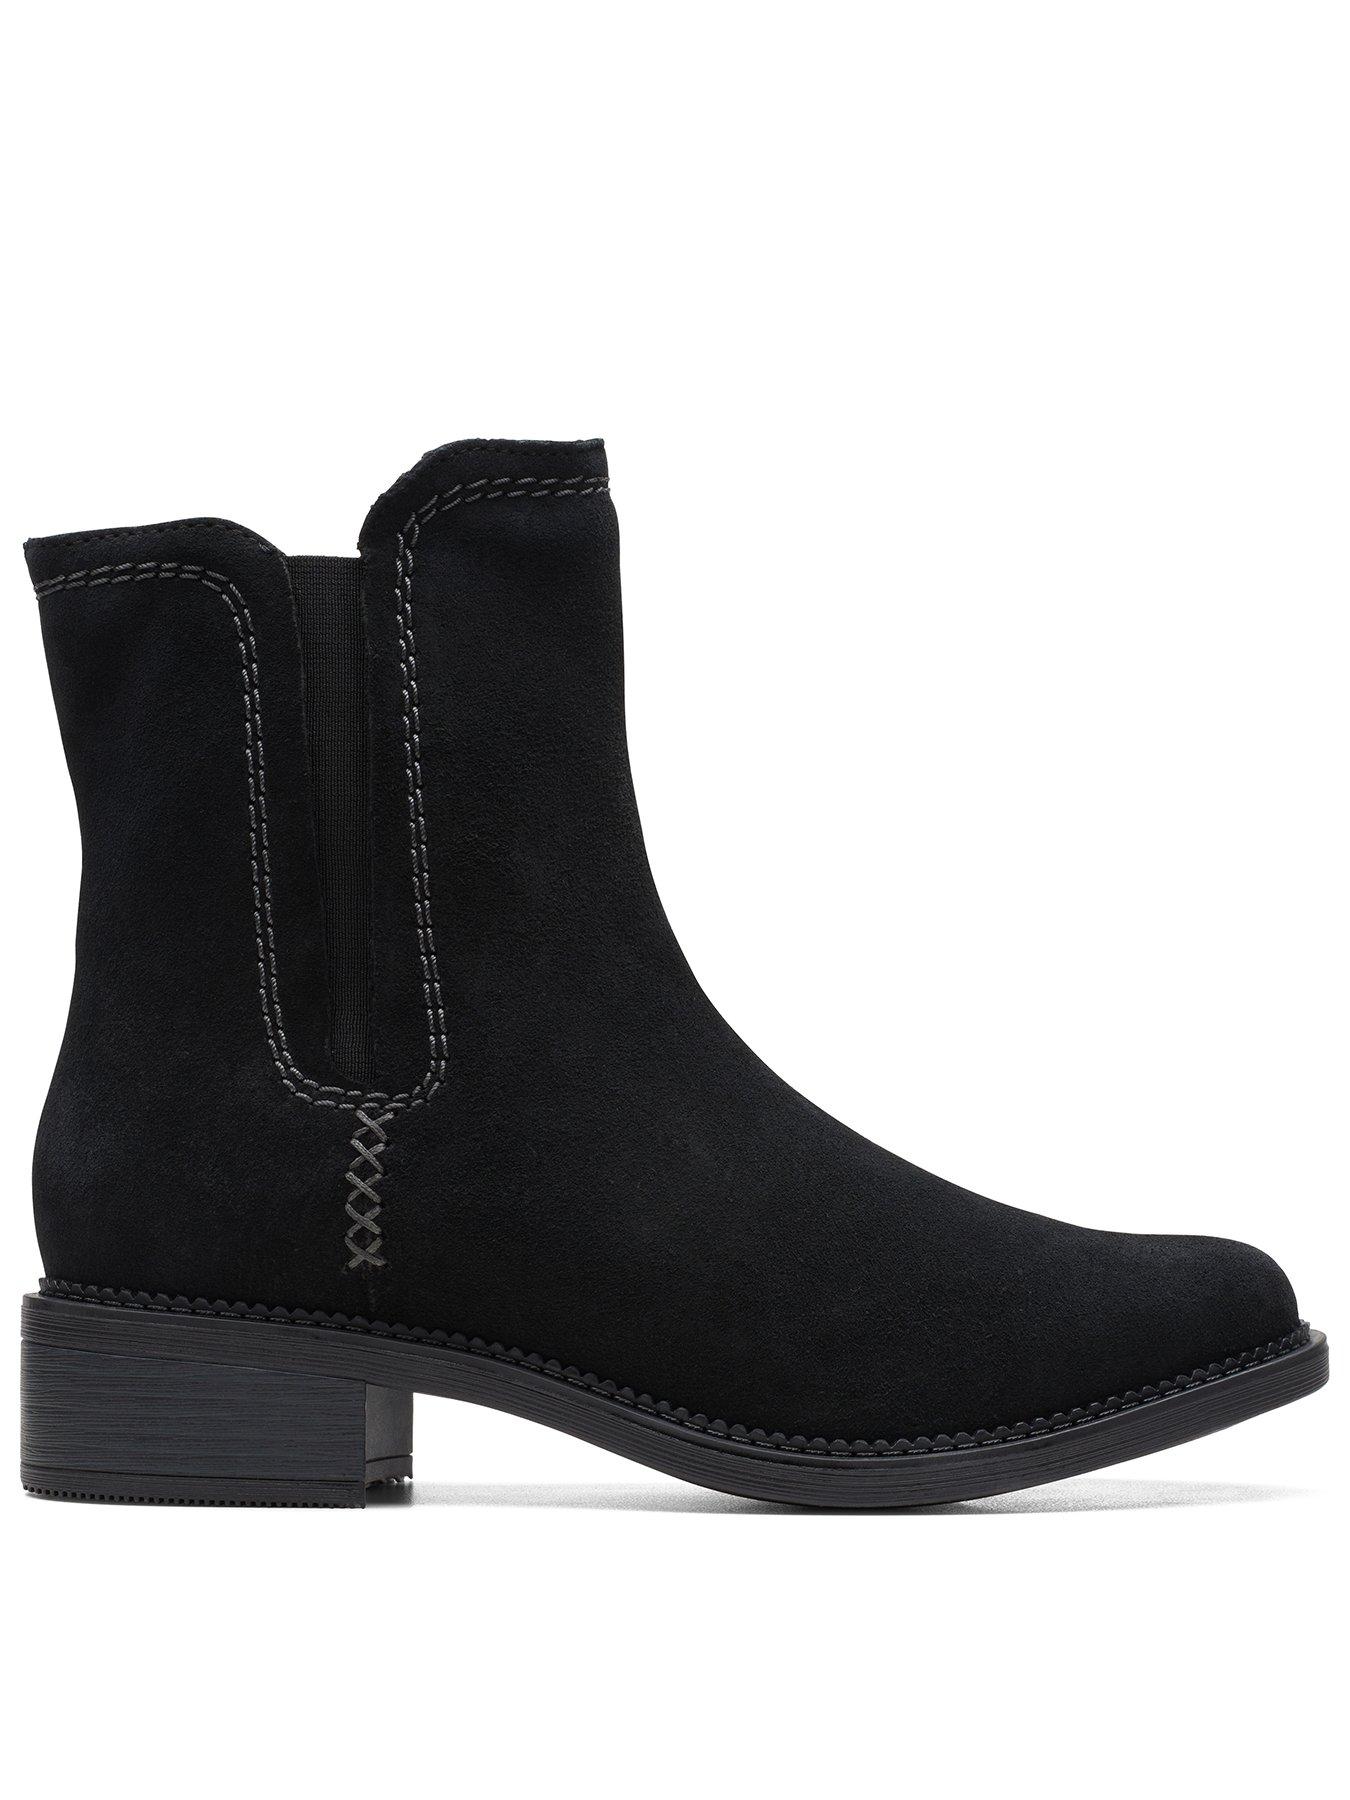 Boots | Womens | Very.co.uk